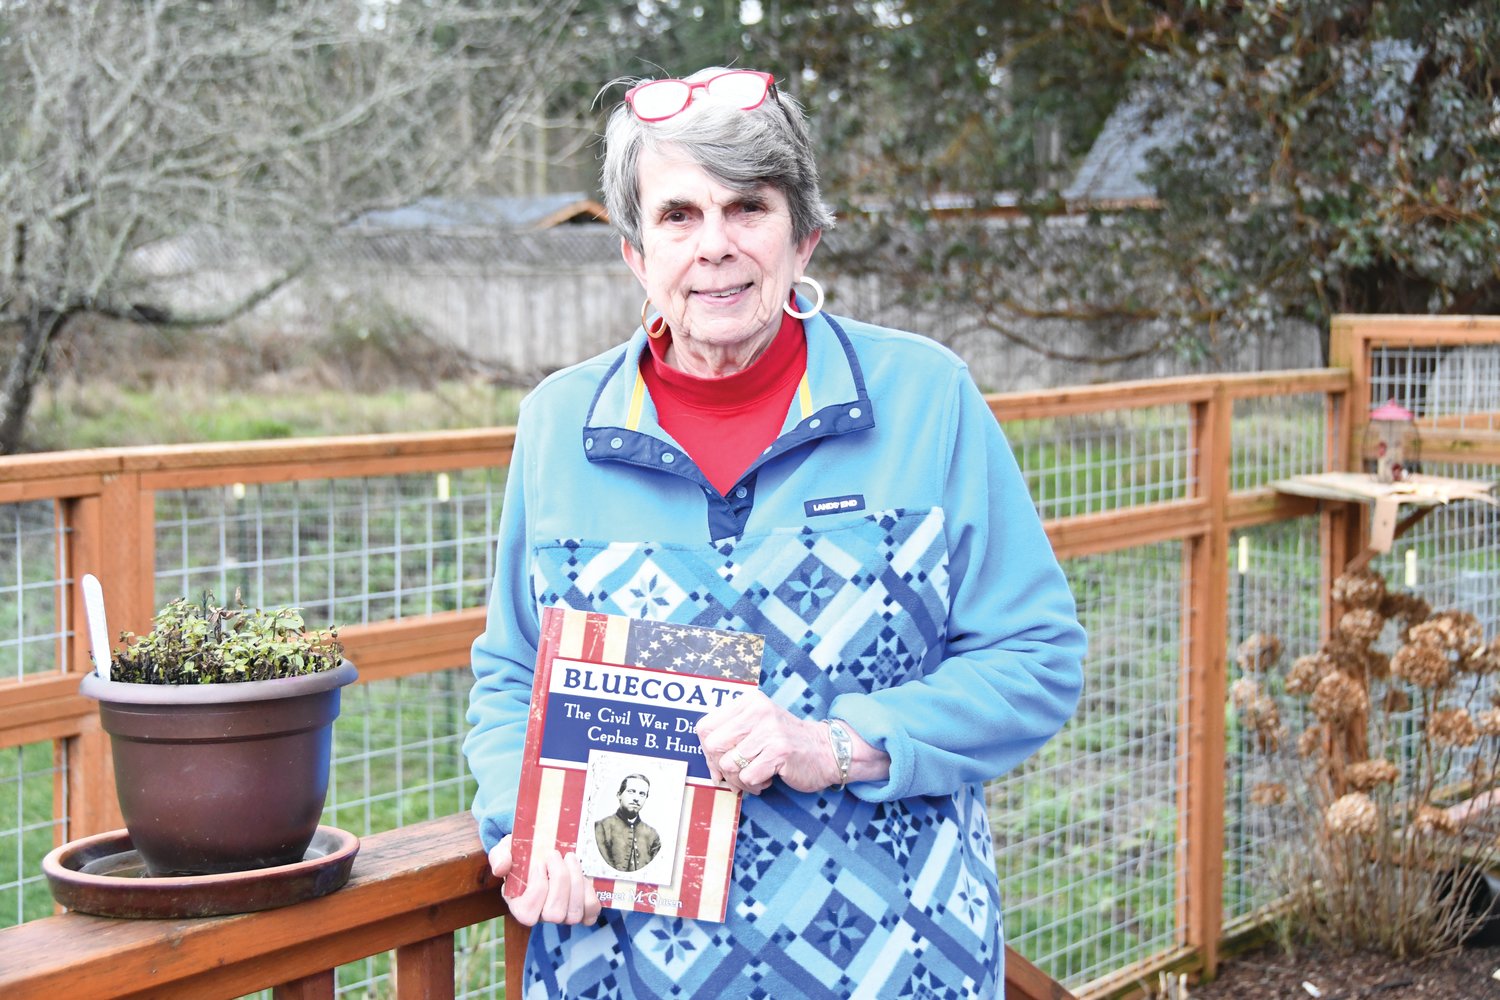 Margaret Queen, author of “Bluecoats,” has lived all across the U.S., moving an estimated 26 to 28 times since marriage. Additionally, she’s lived in some of the cities and spots visited by Cephas B. Hunt during the Civil War.